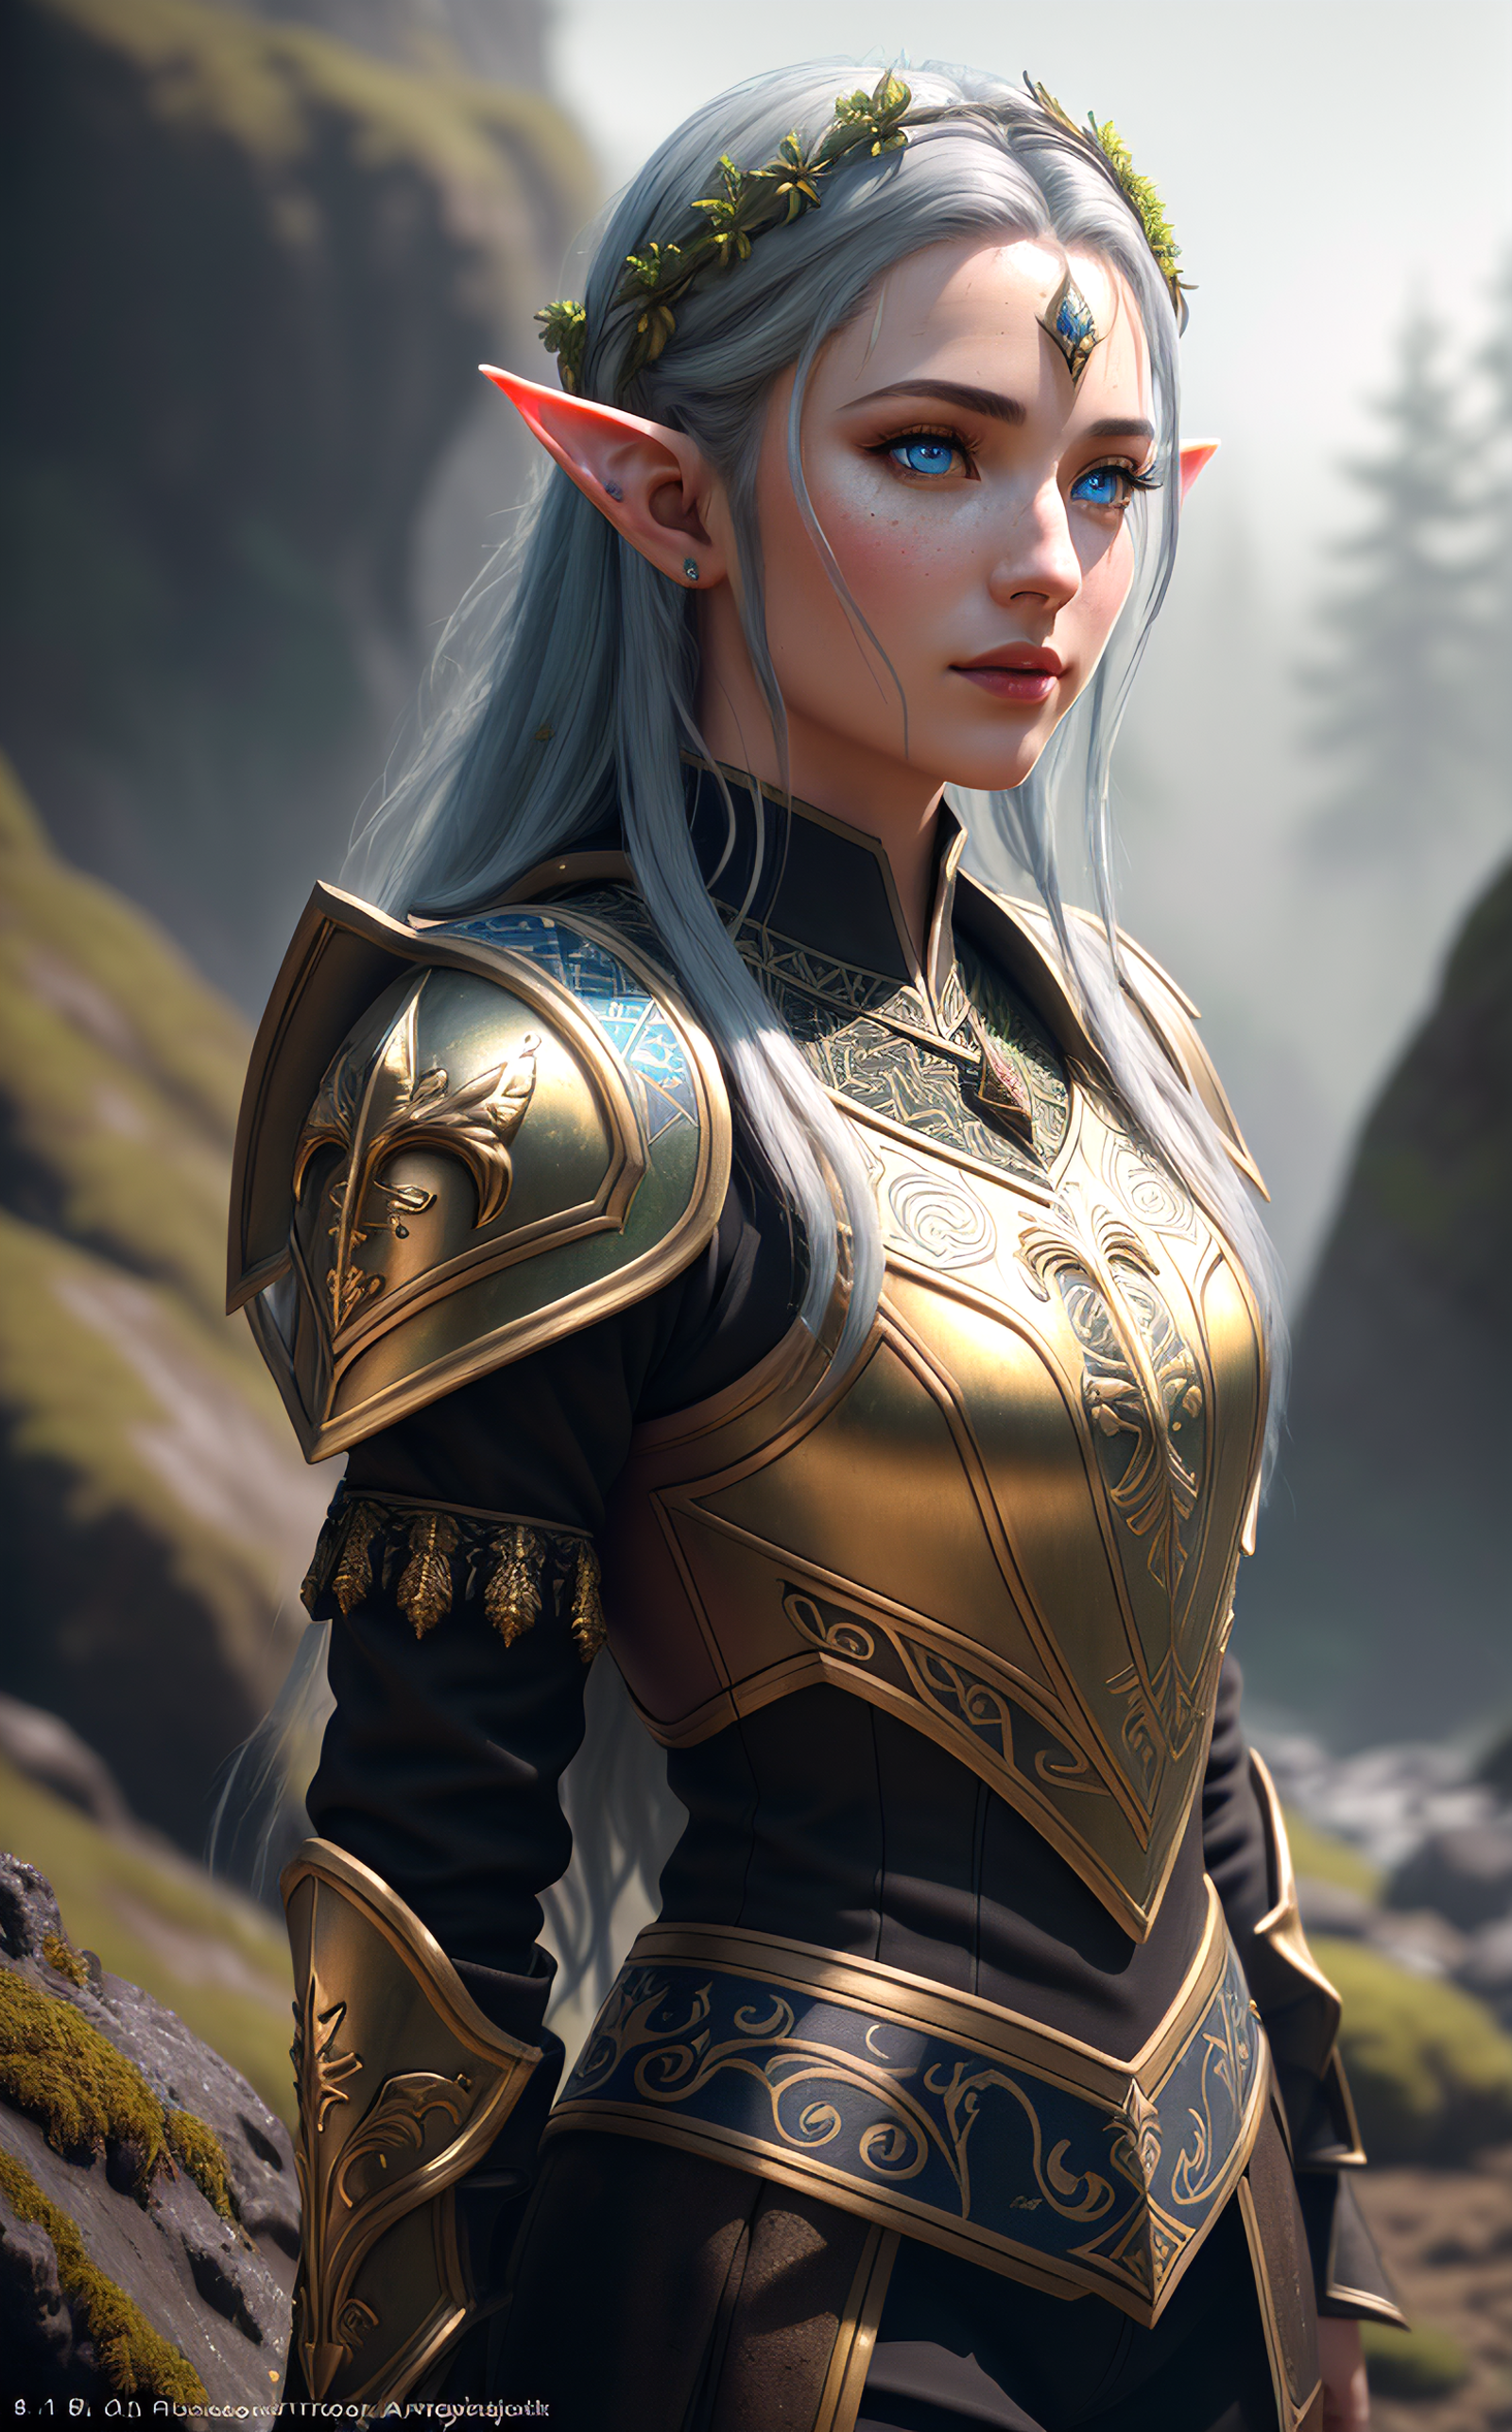 painted (close up portrait) (3/4 view) of a beautiful young elf girl with long wet hair, wearing a full suit of polished b...